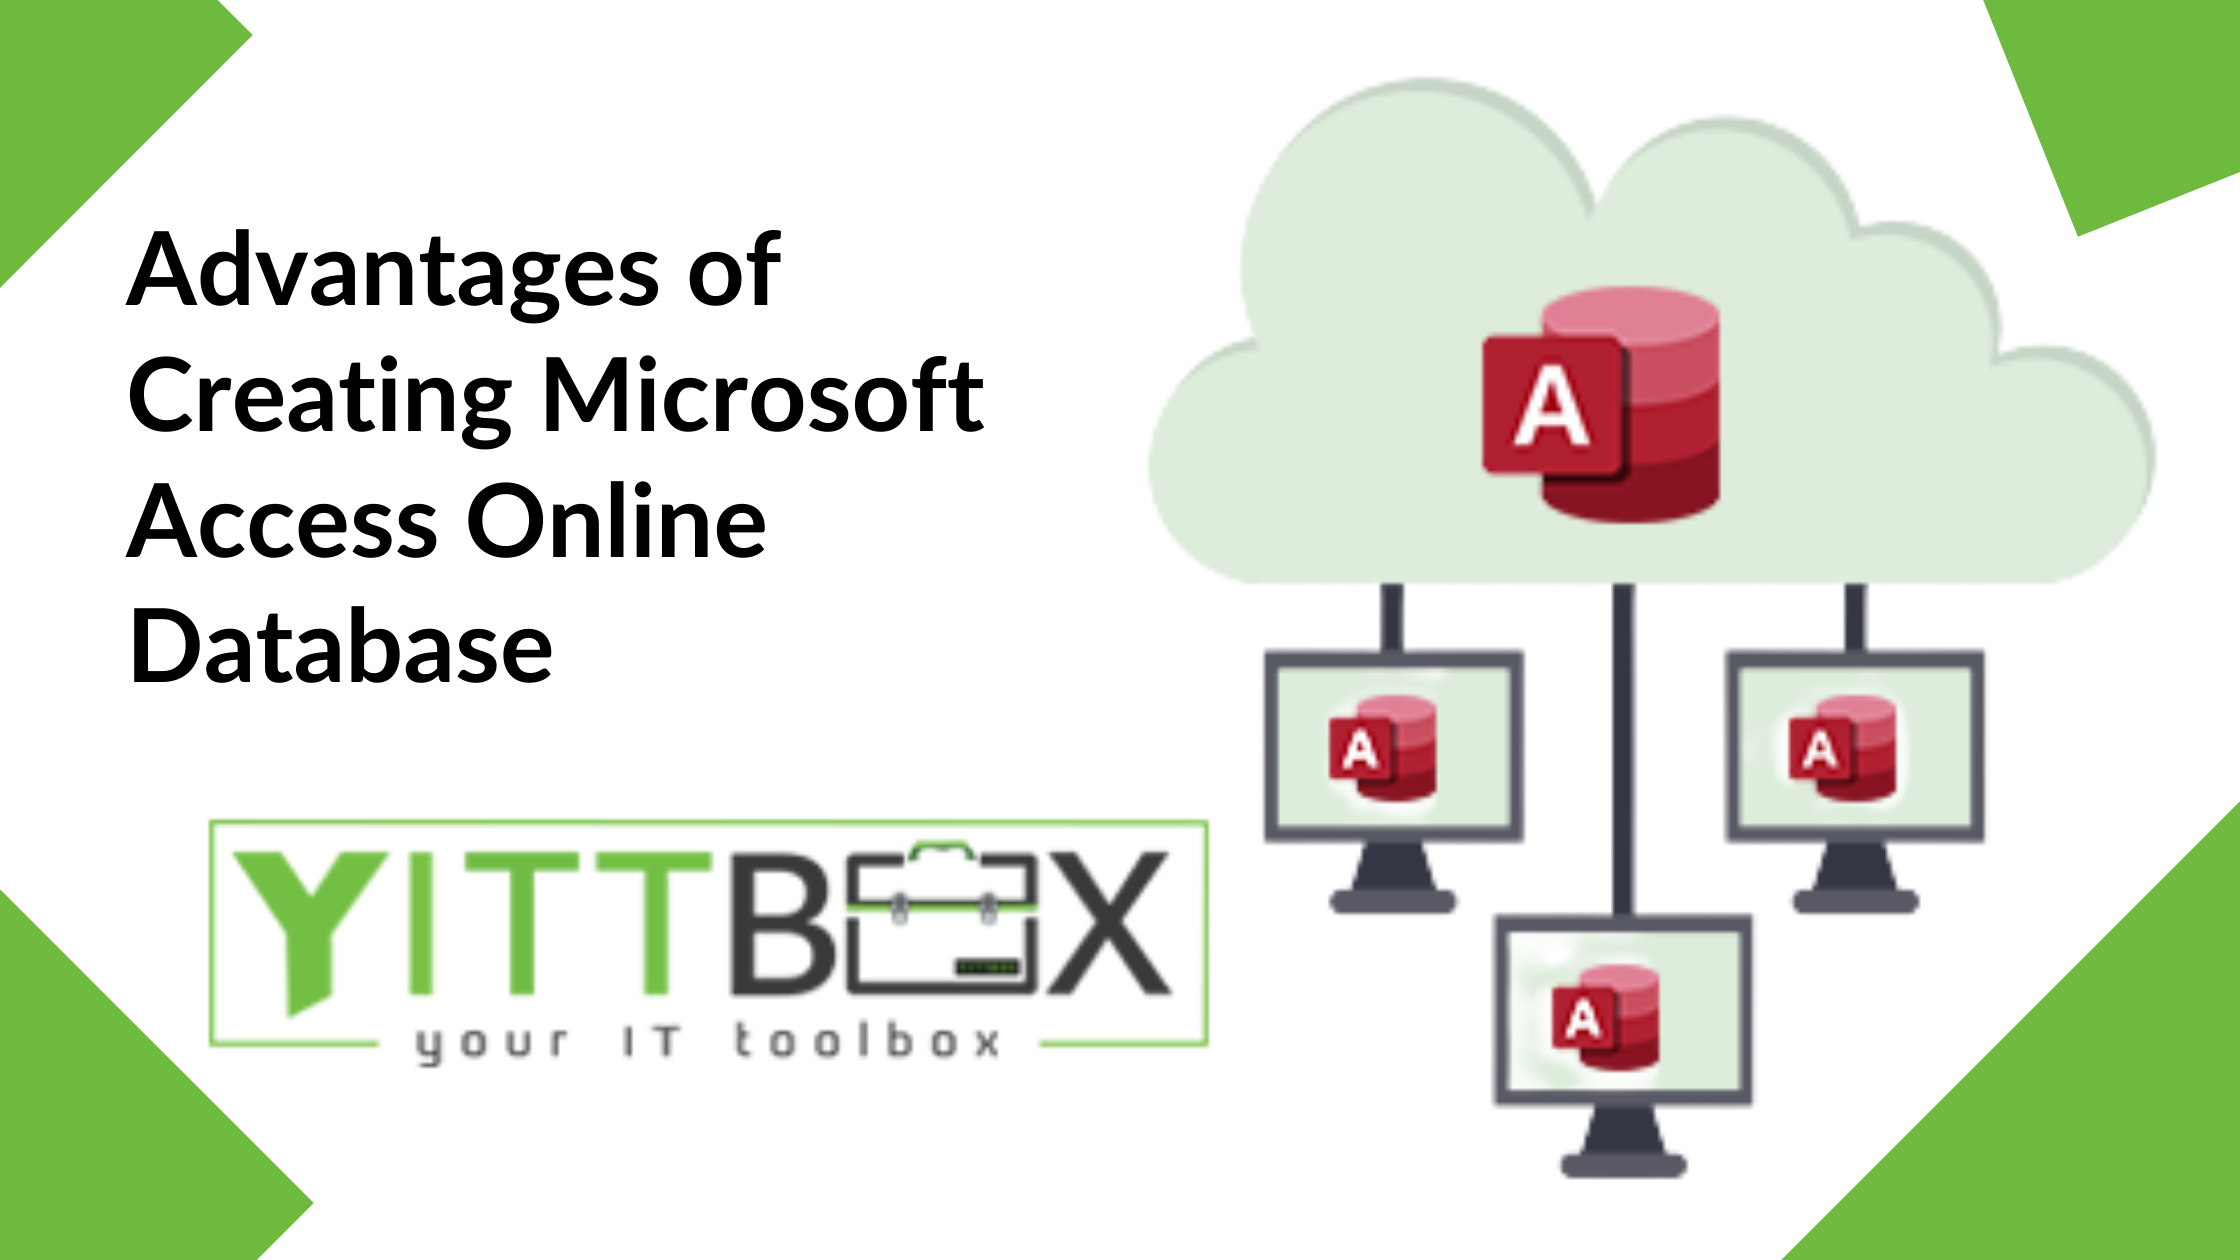 Advantages of Creating Microsoft Access Online Database